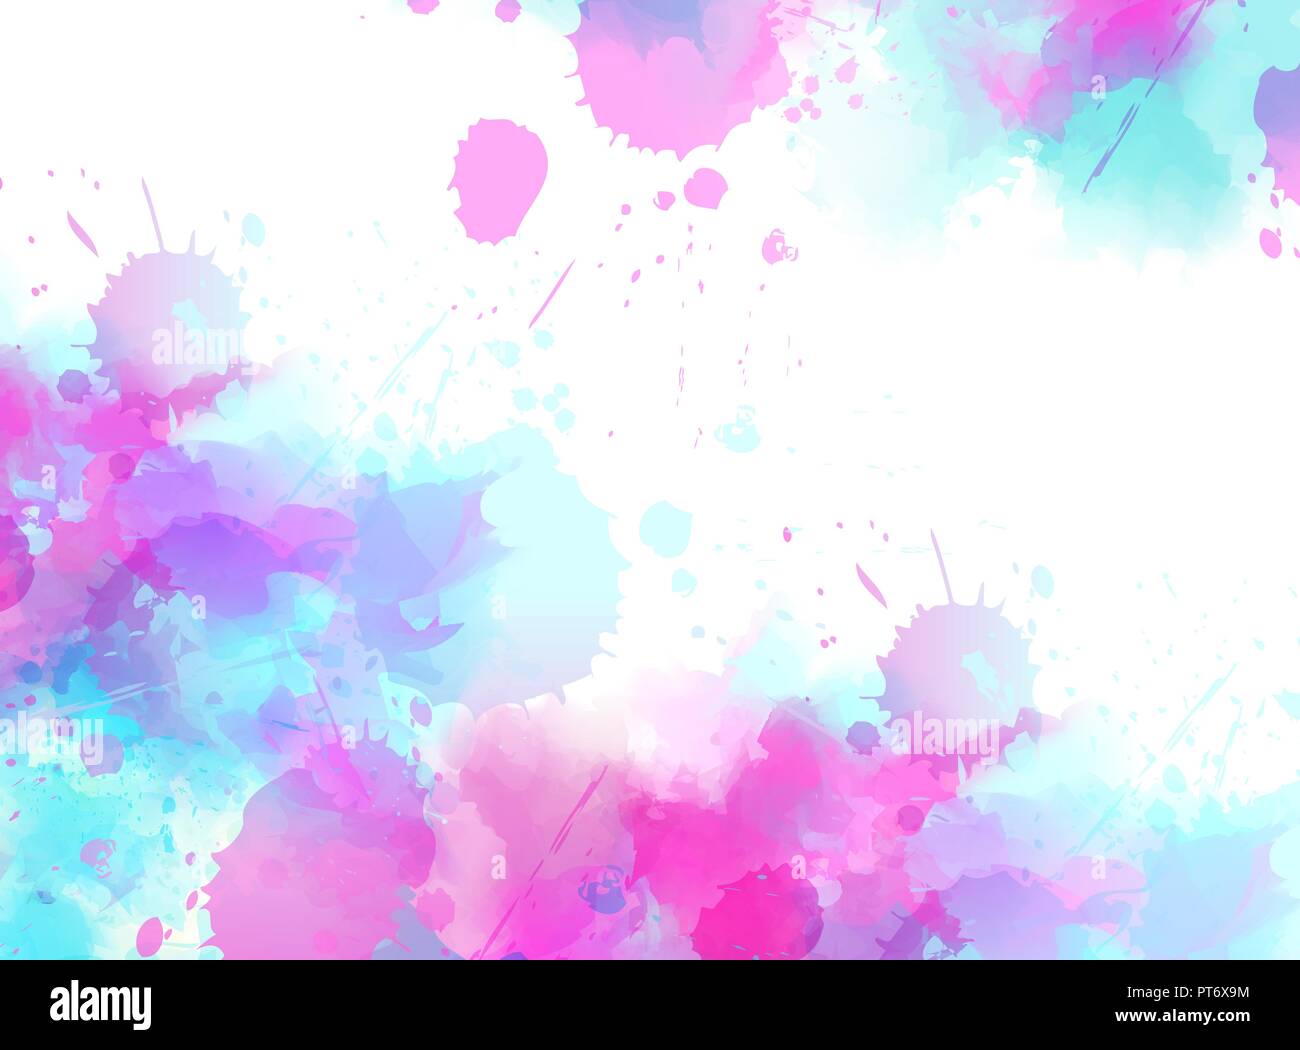 Background with colorful watercolor imitation splash blots frame. Template for your designs. Stock Vector